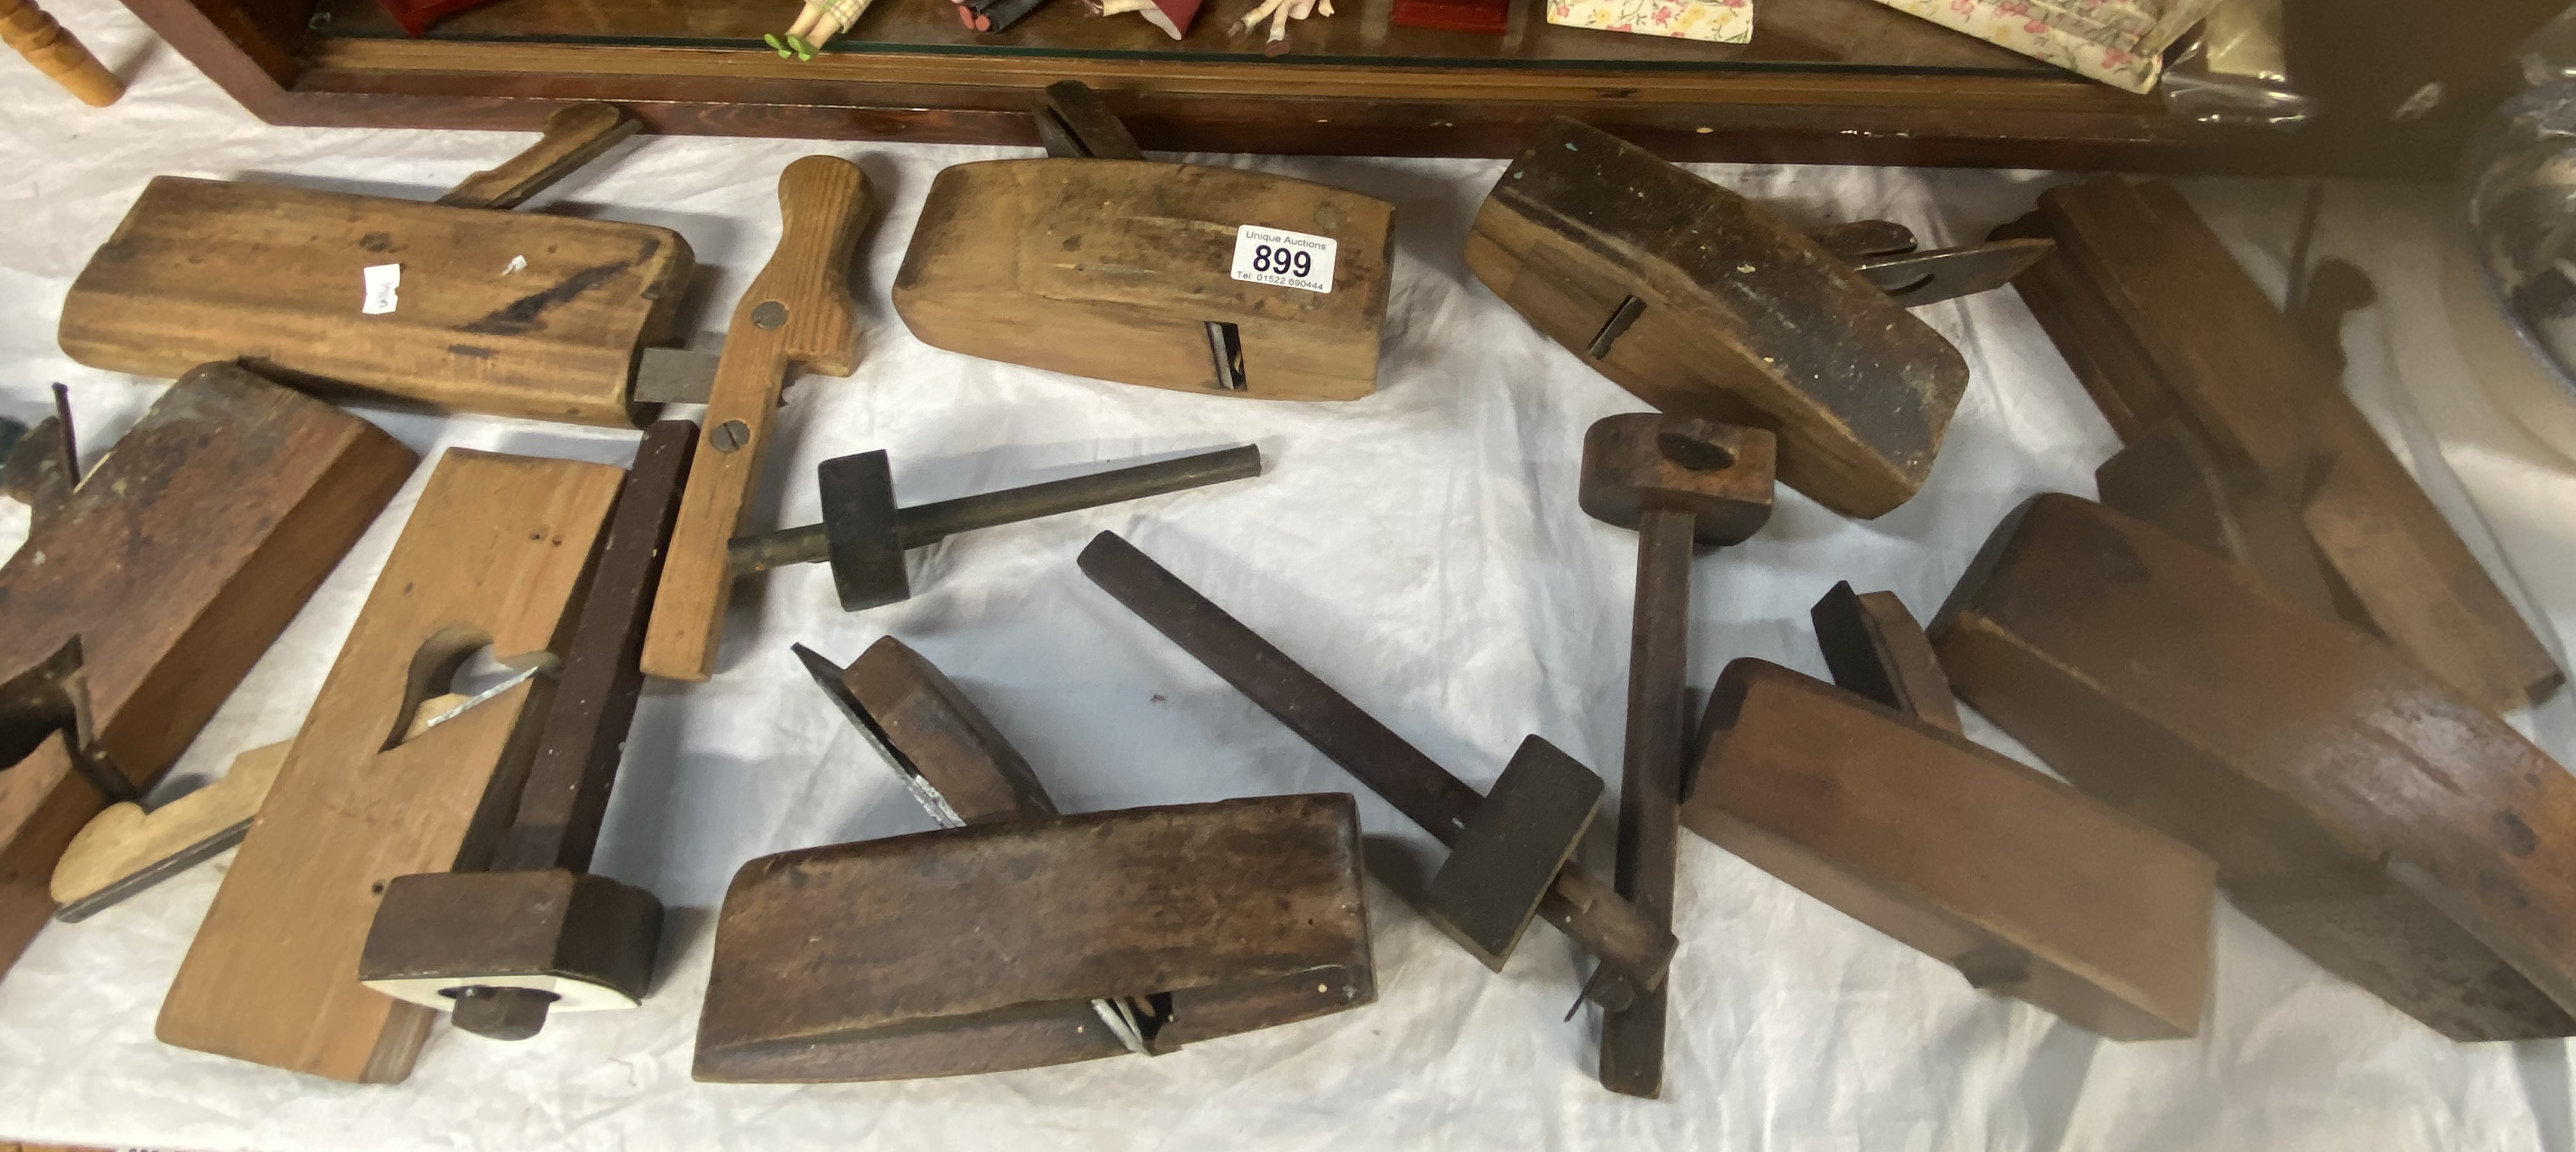 A collection of 14 planes & wood working tools - Image 2 of 2